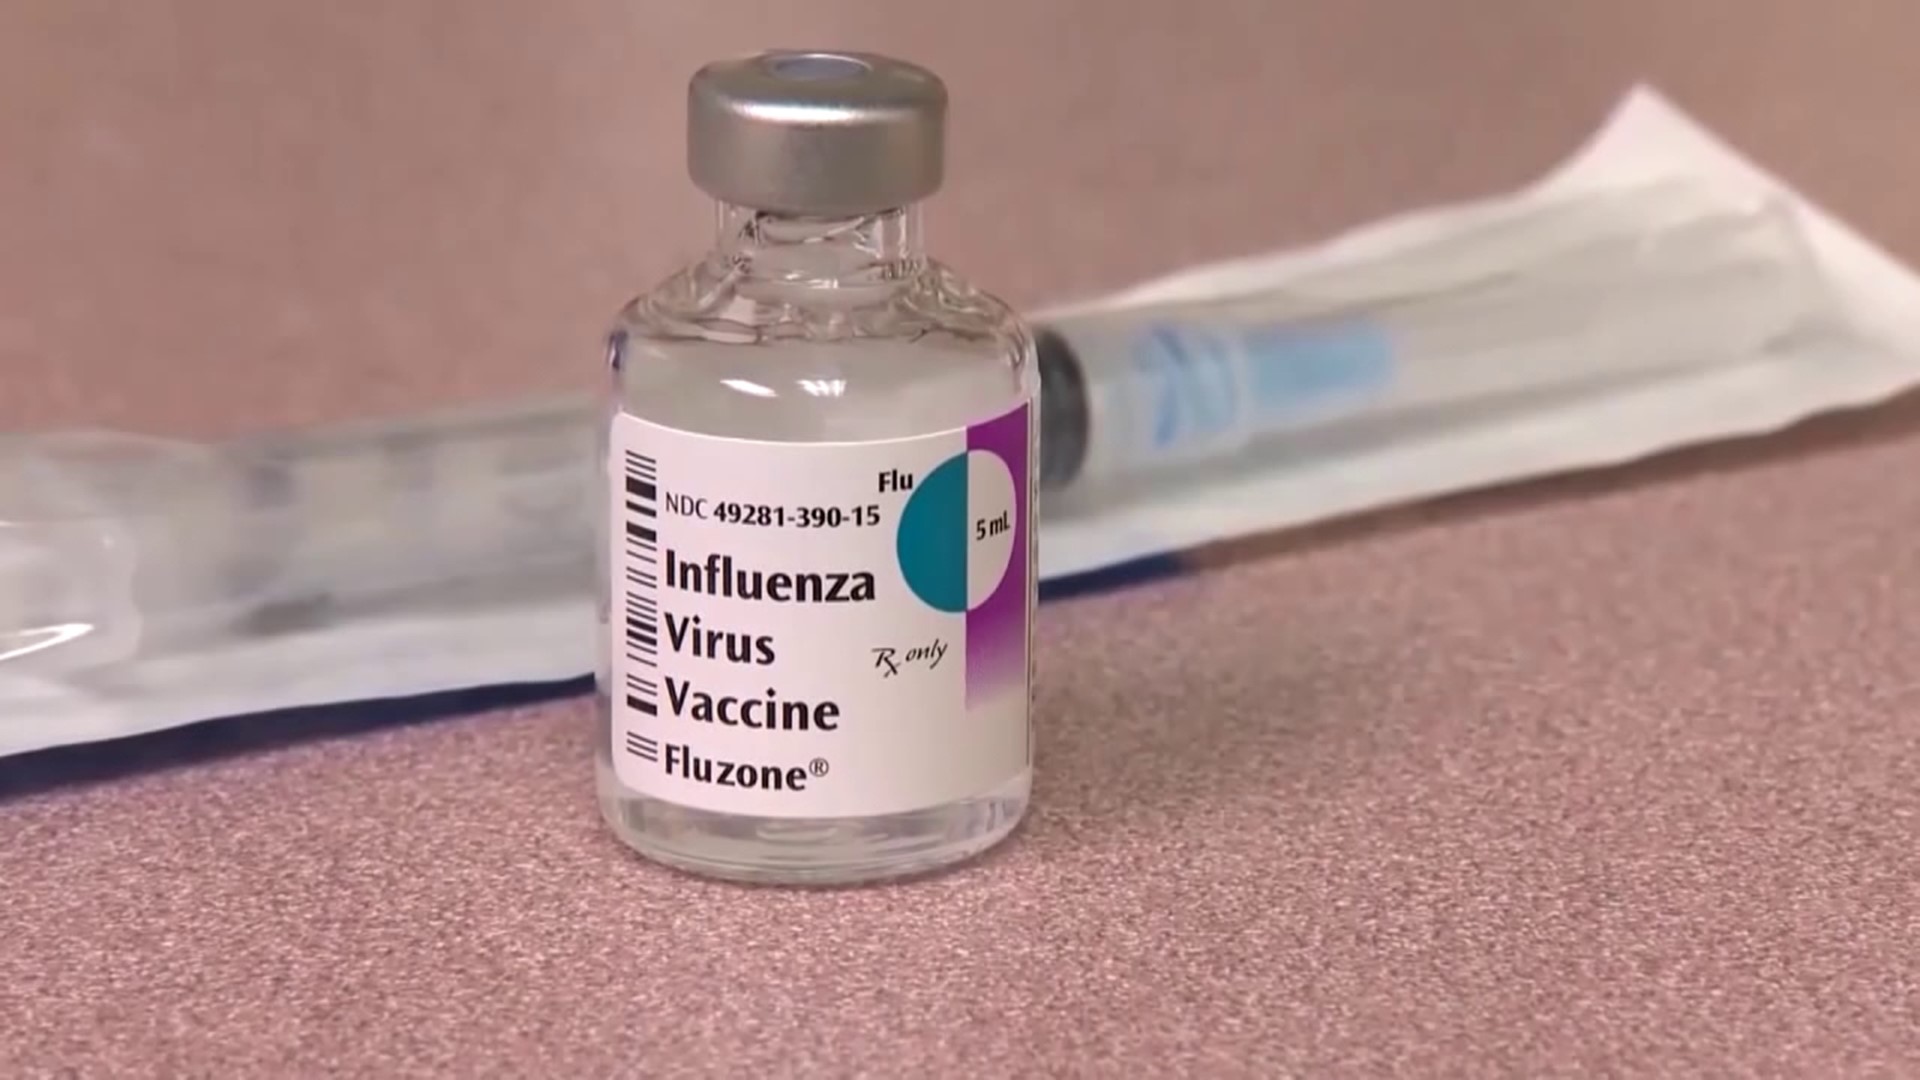 Currently, the state is reporting more than 28,000 cases of influenza, 4,007 of them in our viewing area.